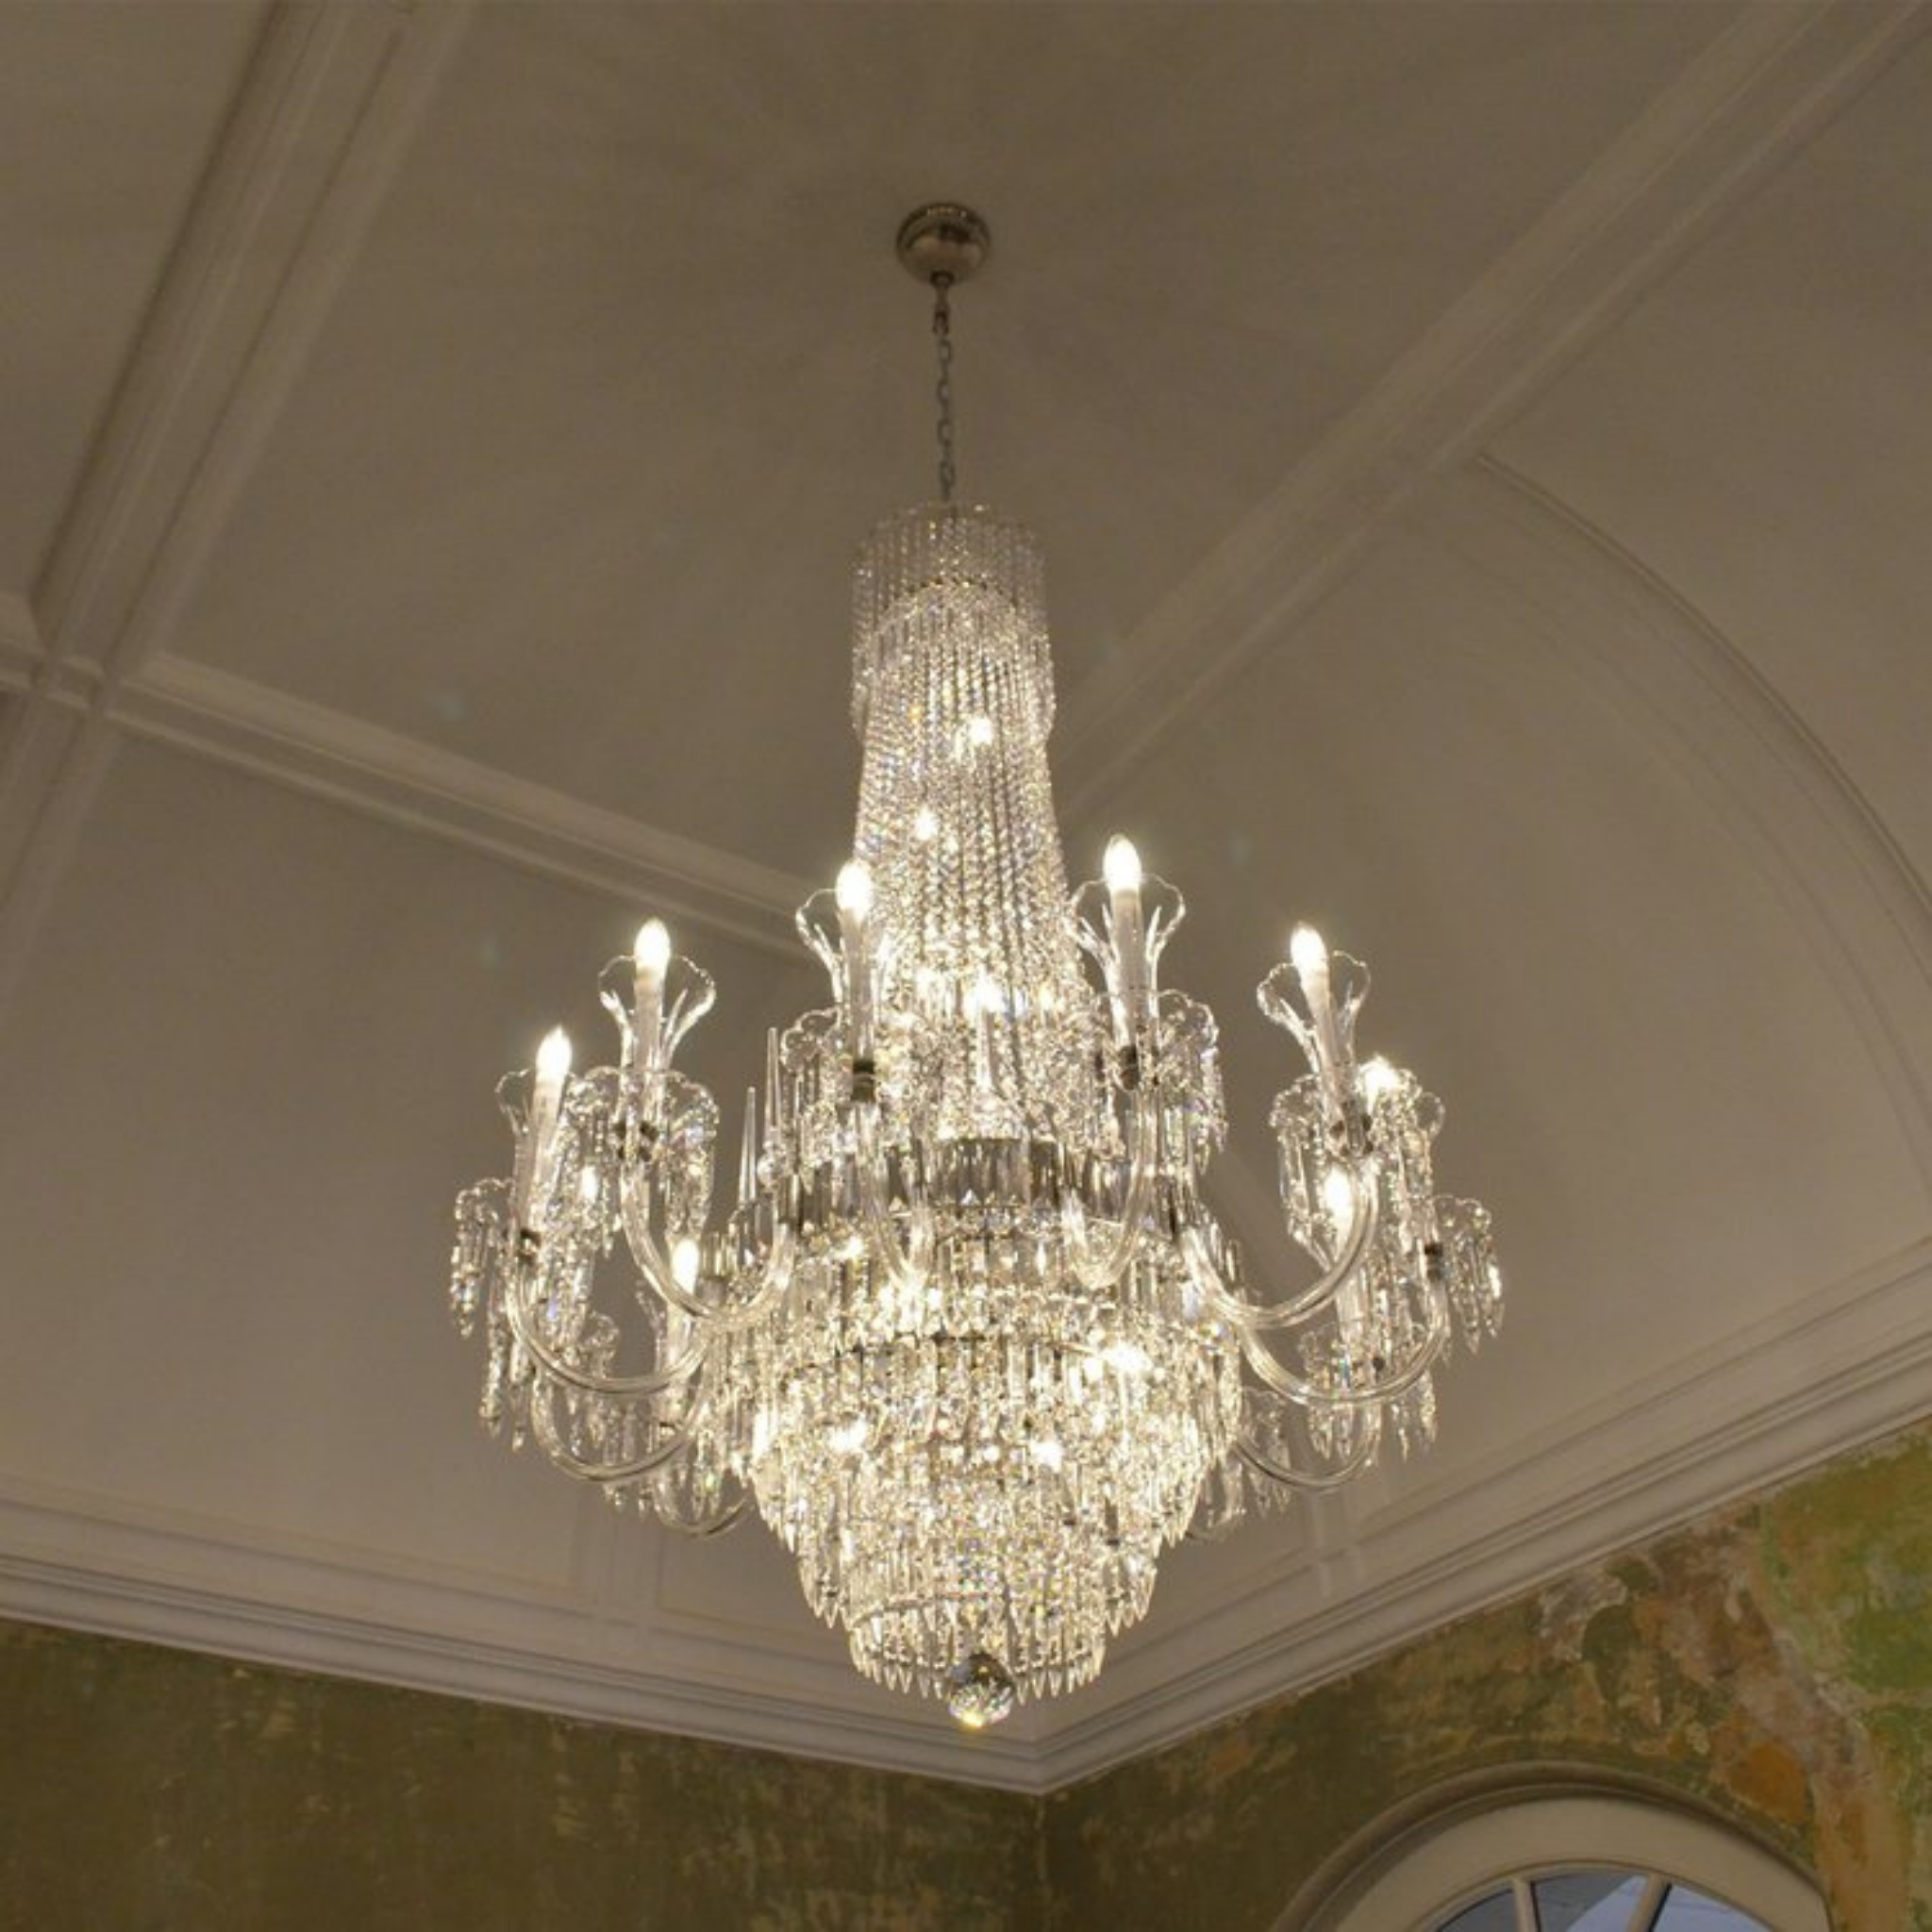 Lanceur 22 Crystal Glass Chandelier - Wranovsky - Luxury Lighting Boutique